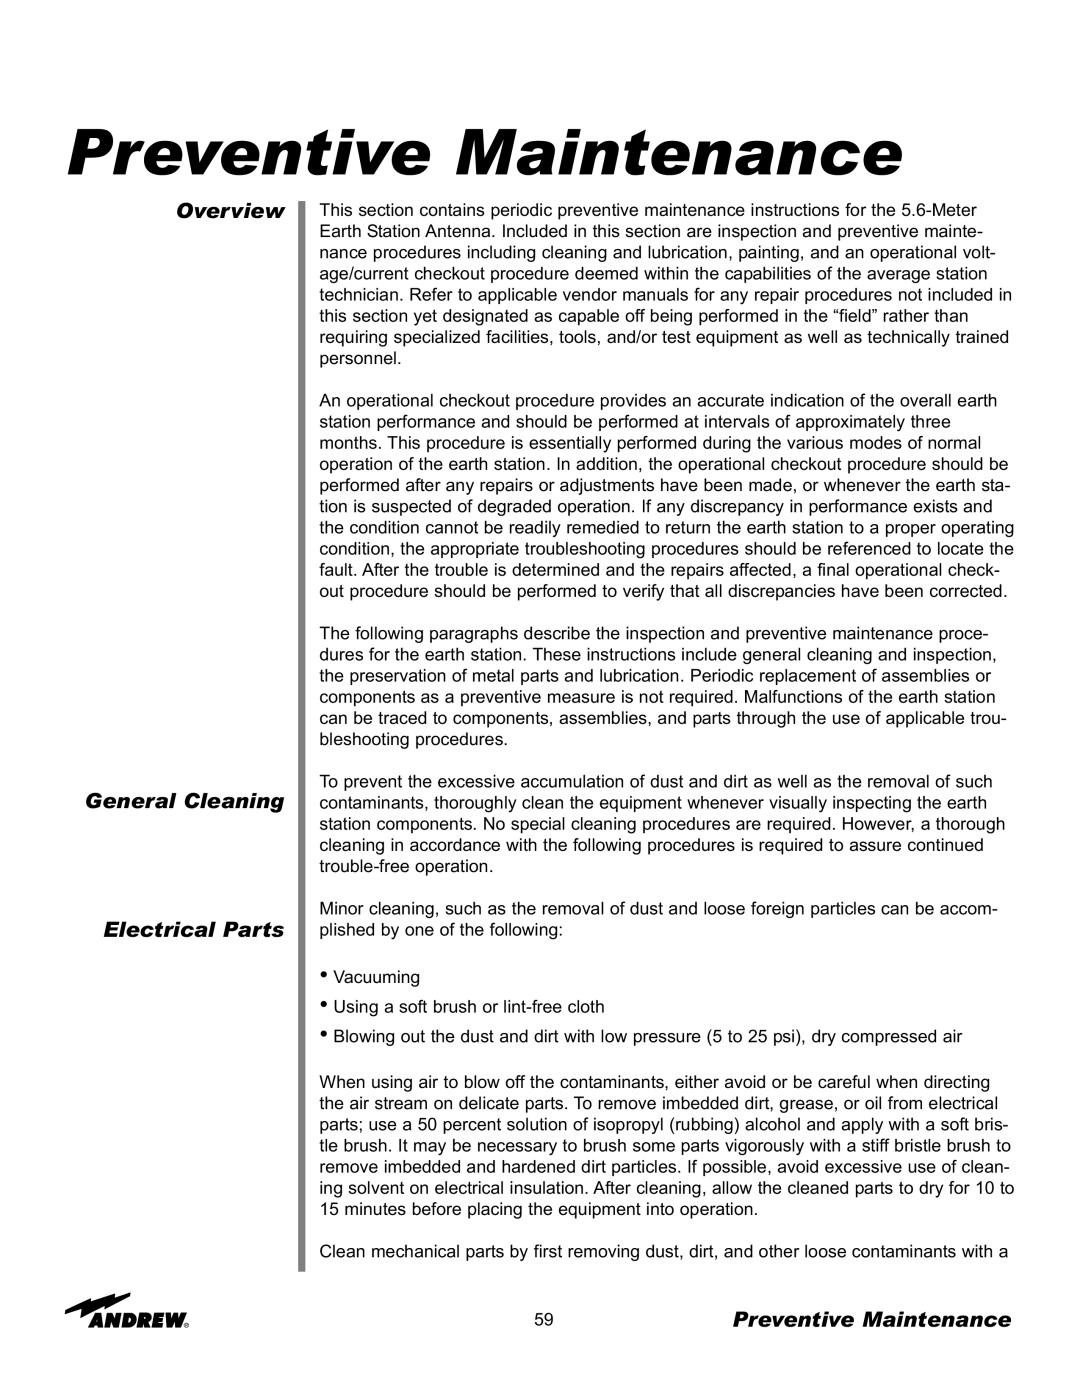 Andrew 7.6-Meter ESA manual Preventive Maintenance, Overview General Cleaning Electrical Parts 